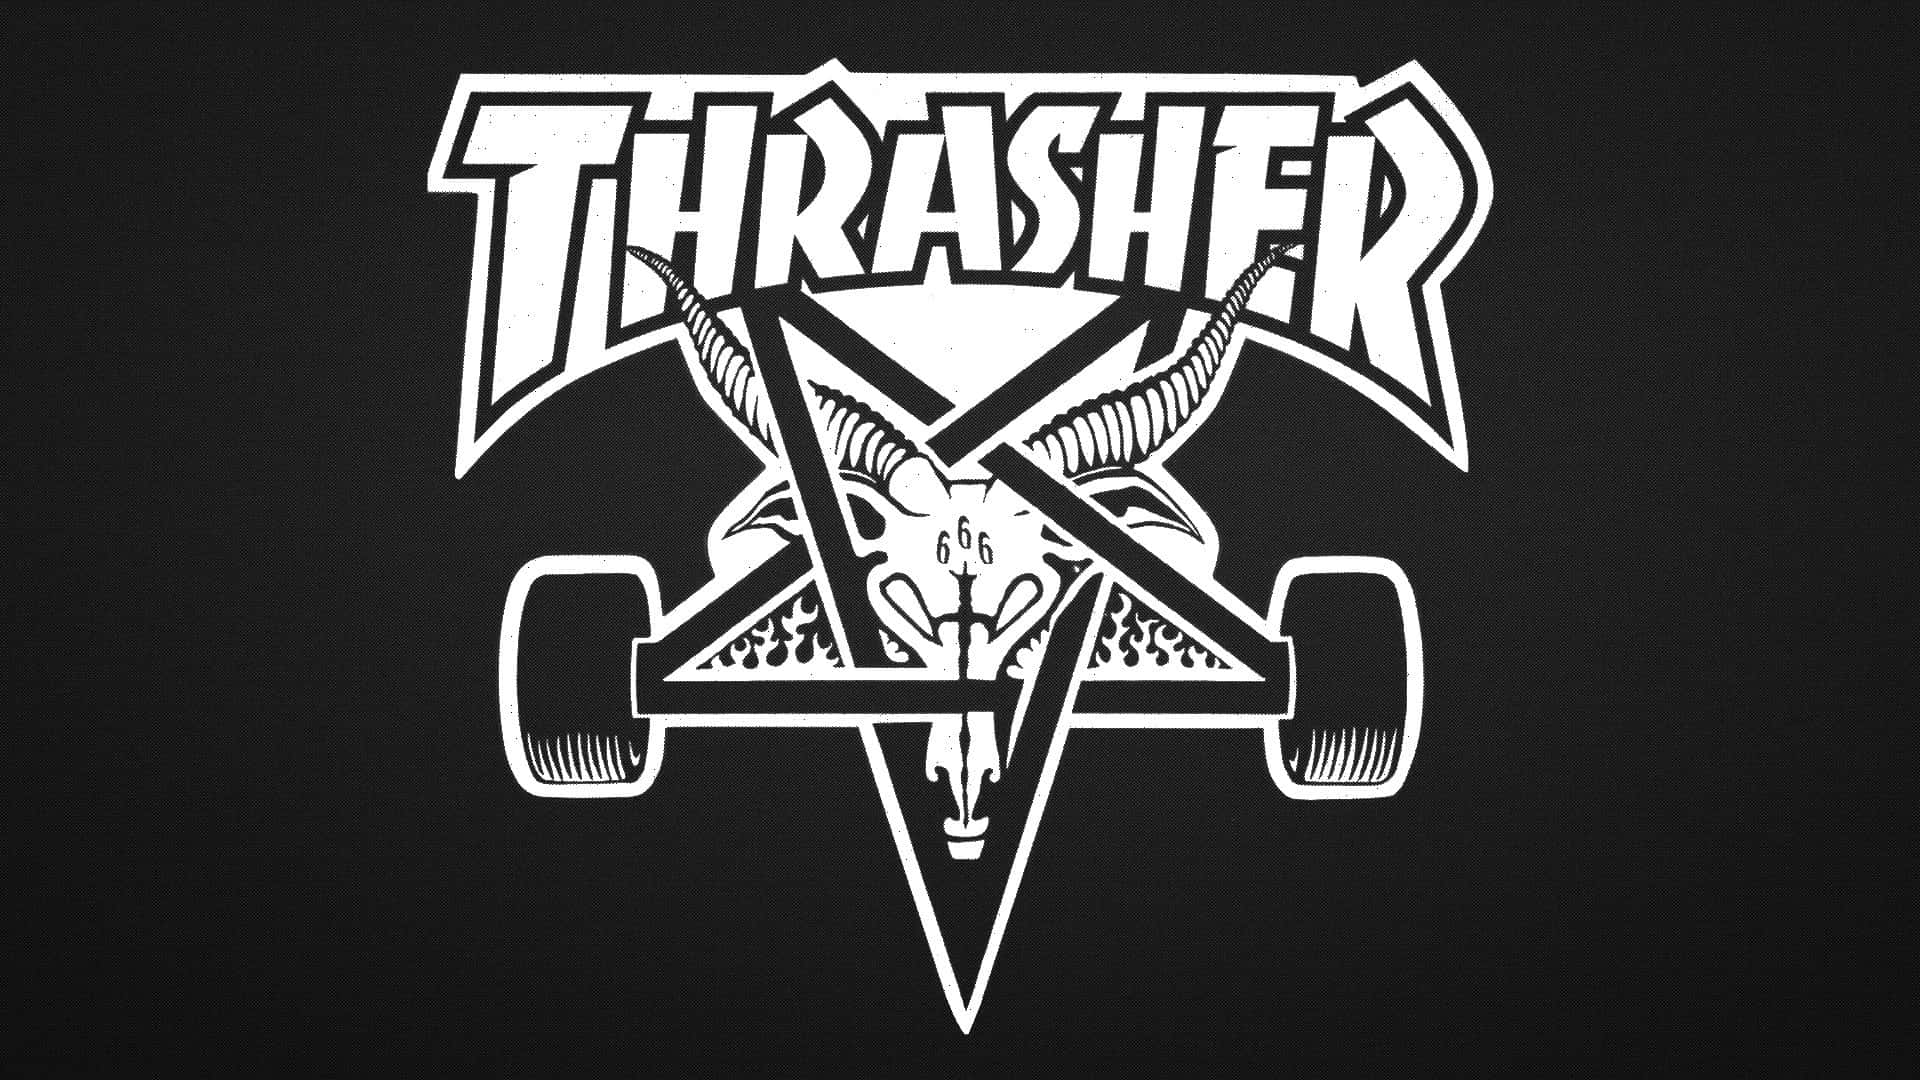 A classic Thrasher skateboard for you to shred the streets.